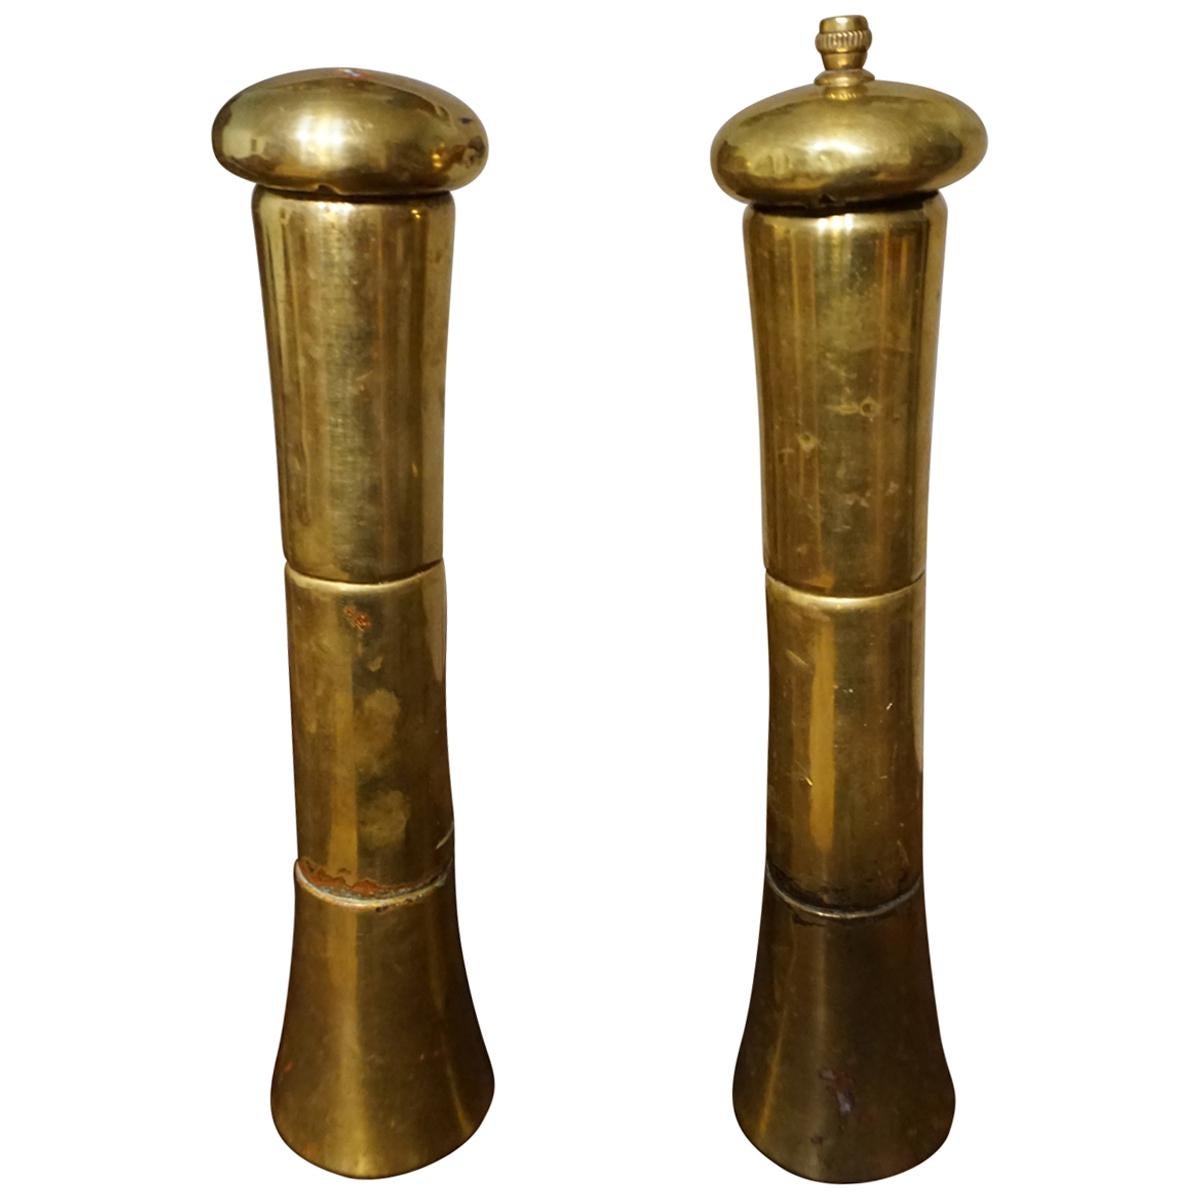 Antique Tall Brass Salt and Pepper Grinders, Italy